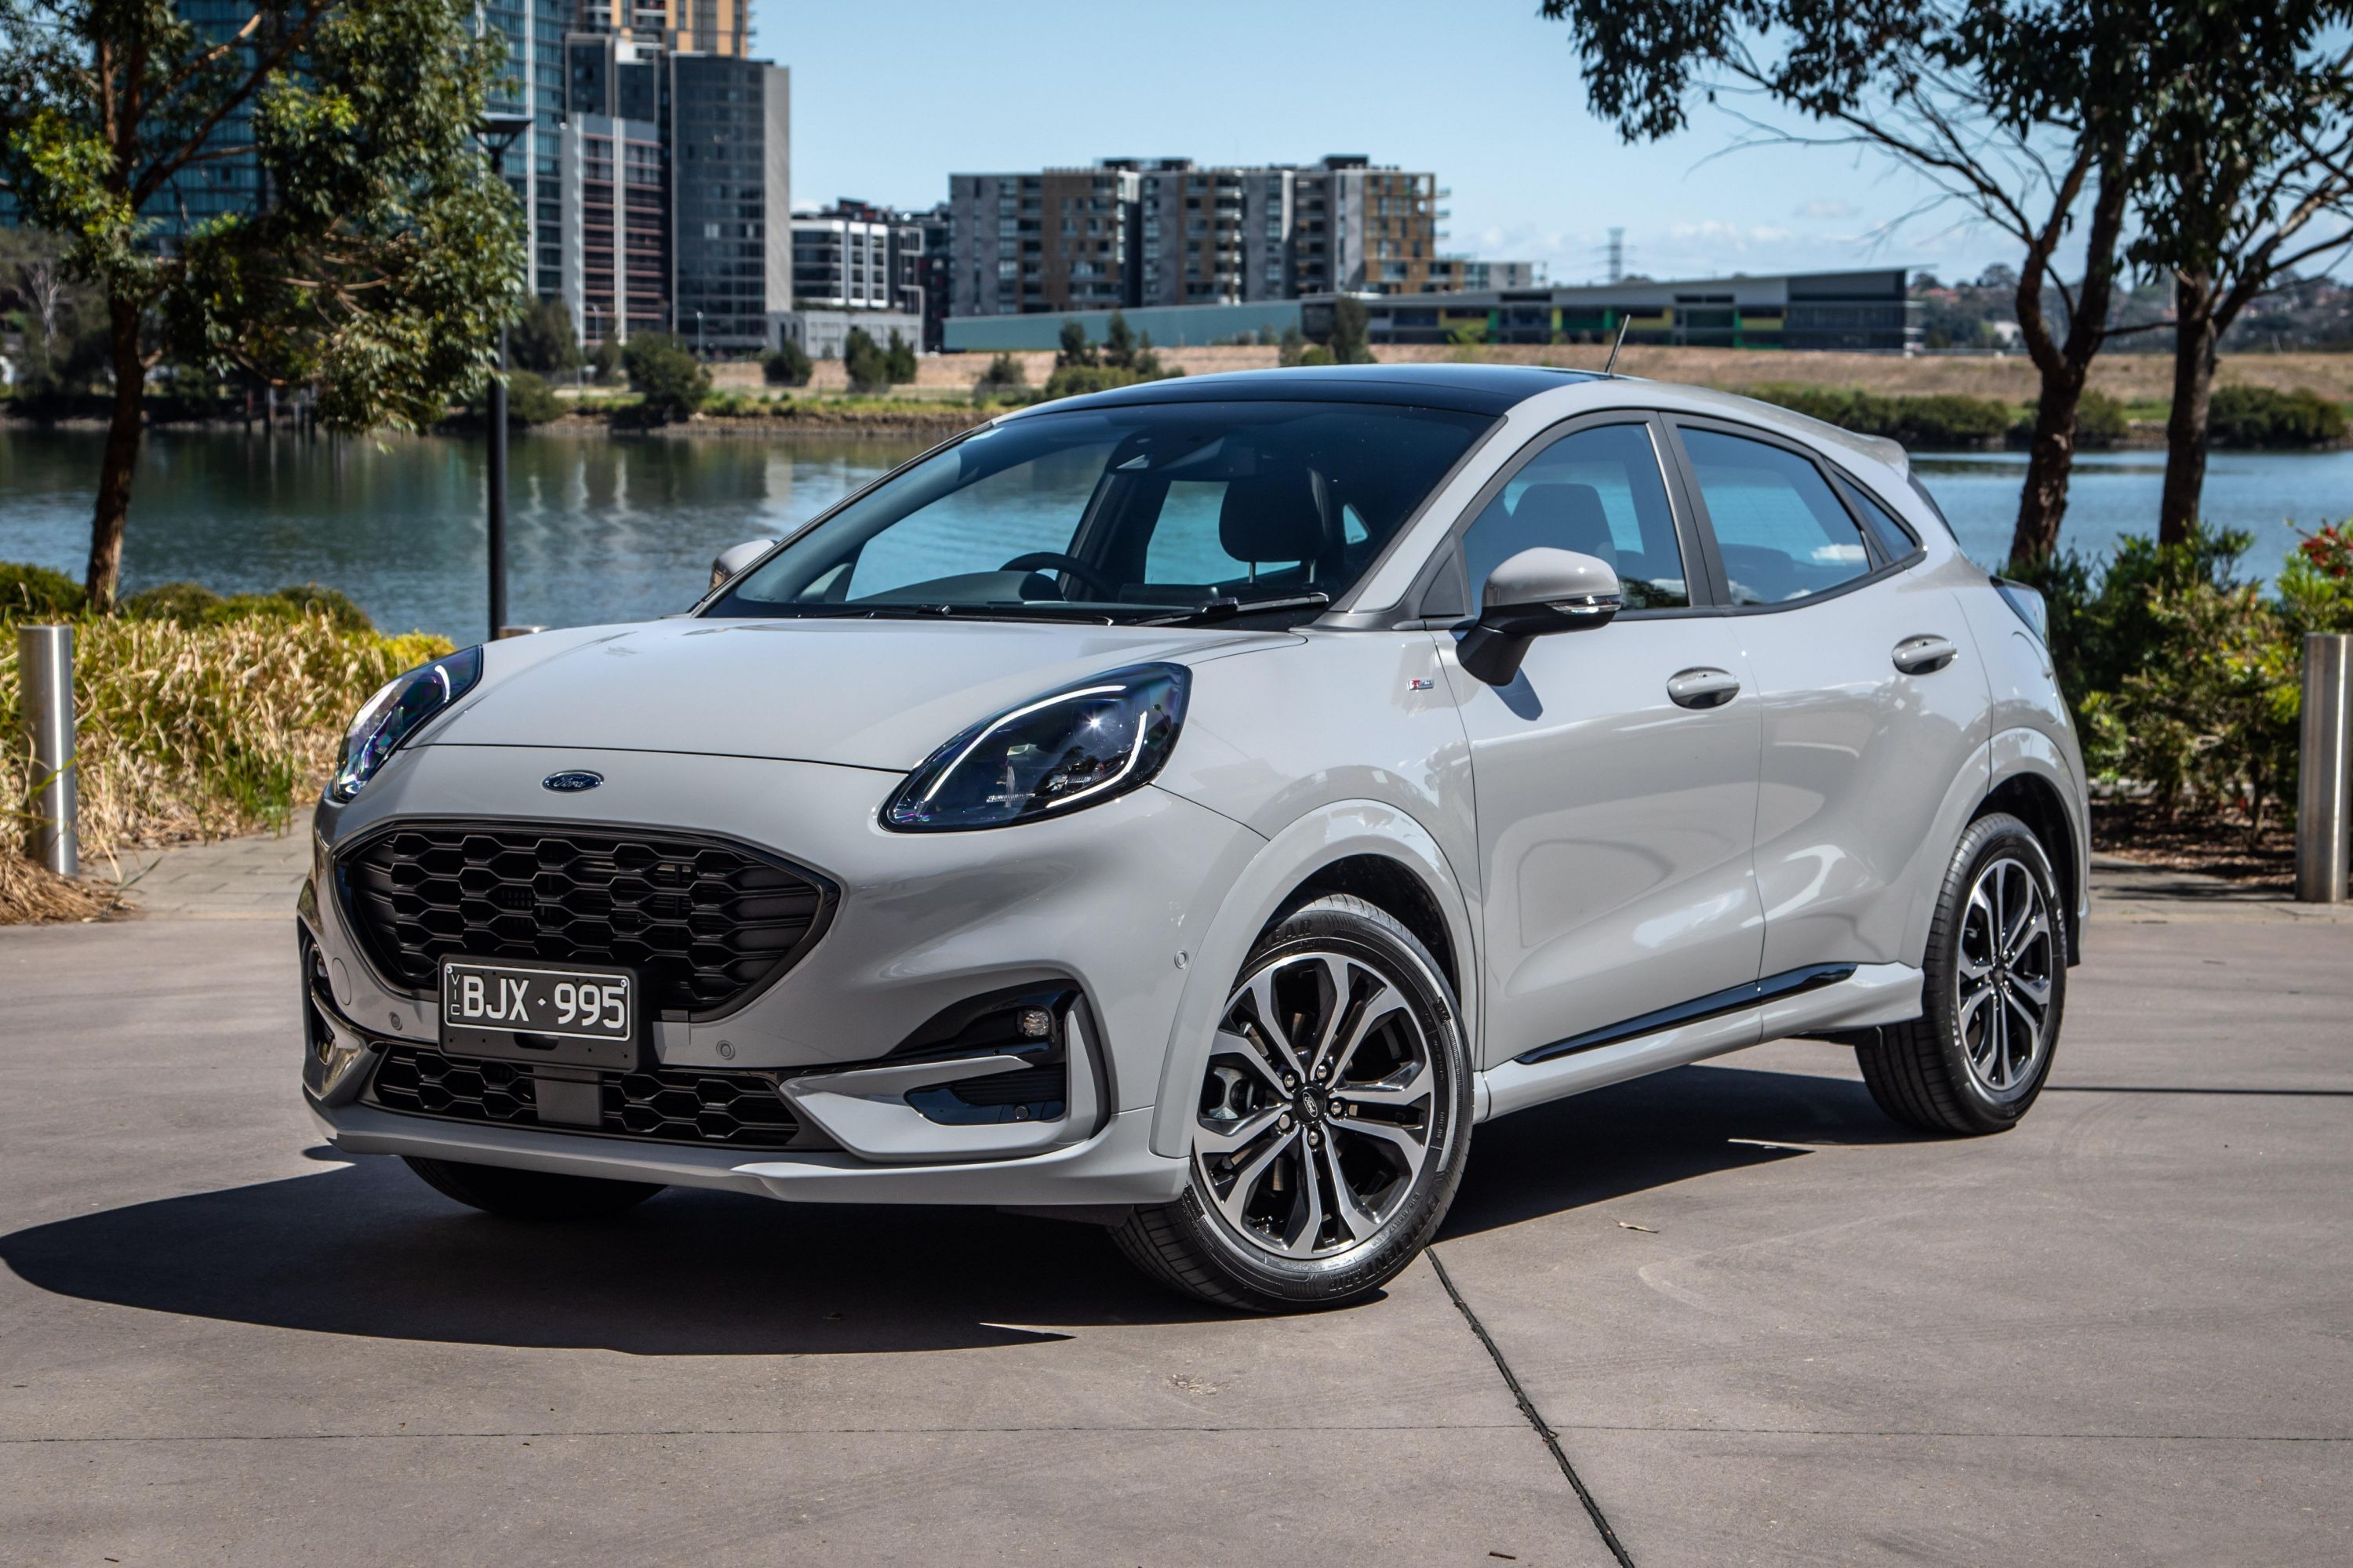 2021 Ford Puma price and specs | CarExpert